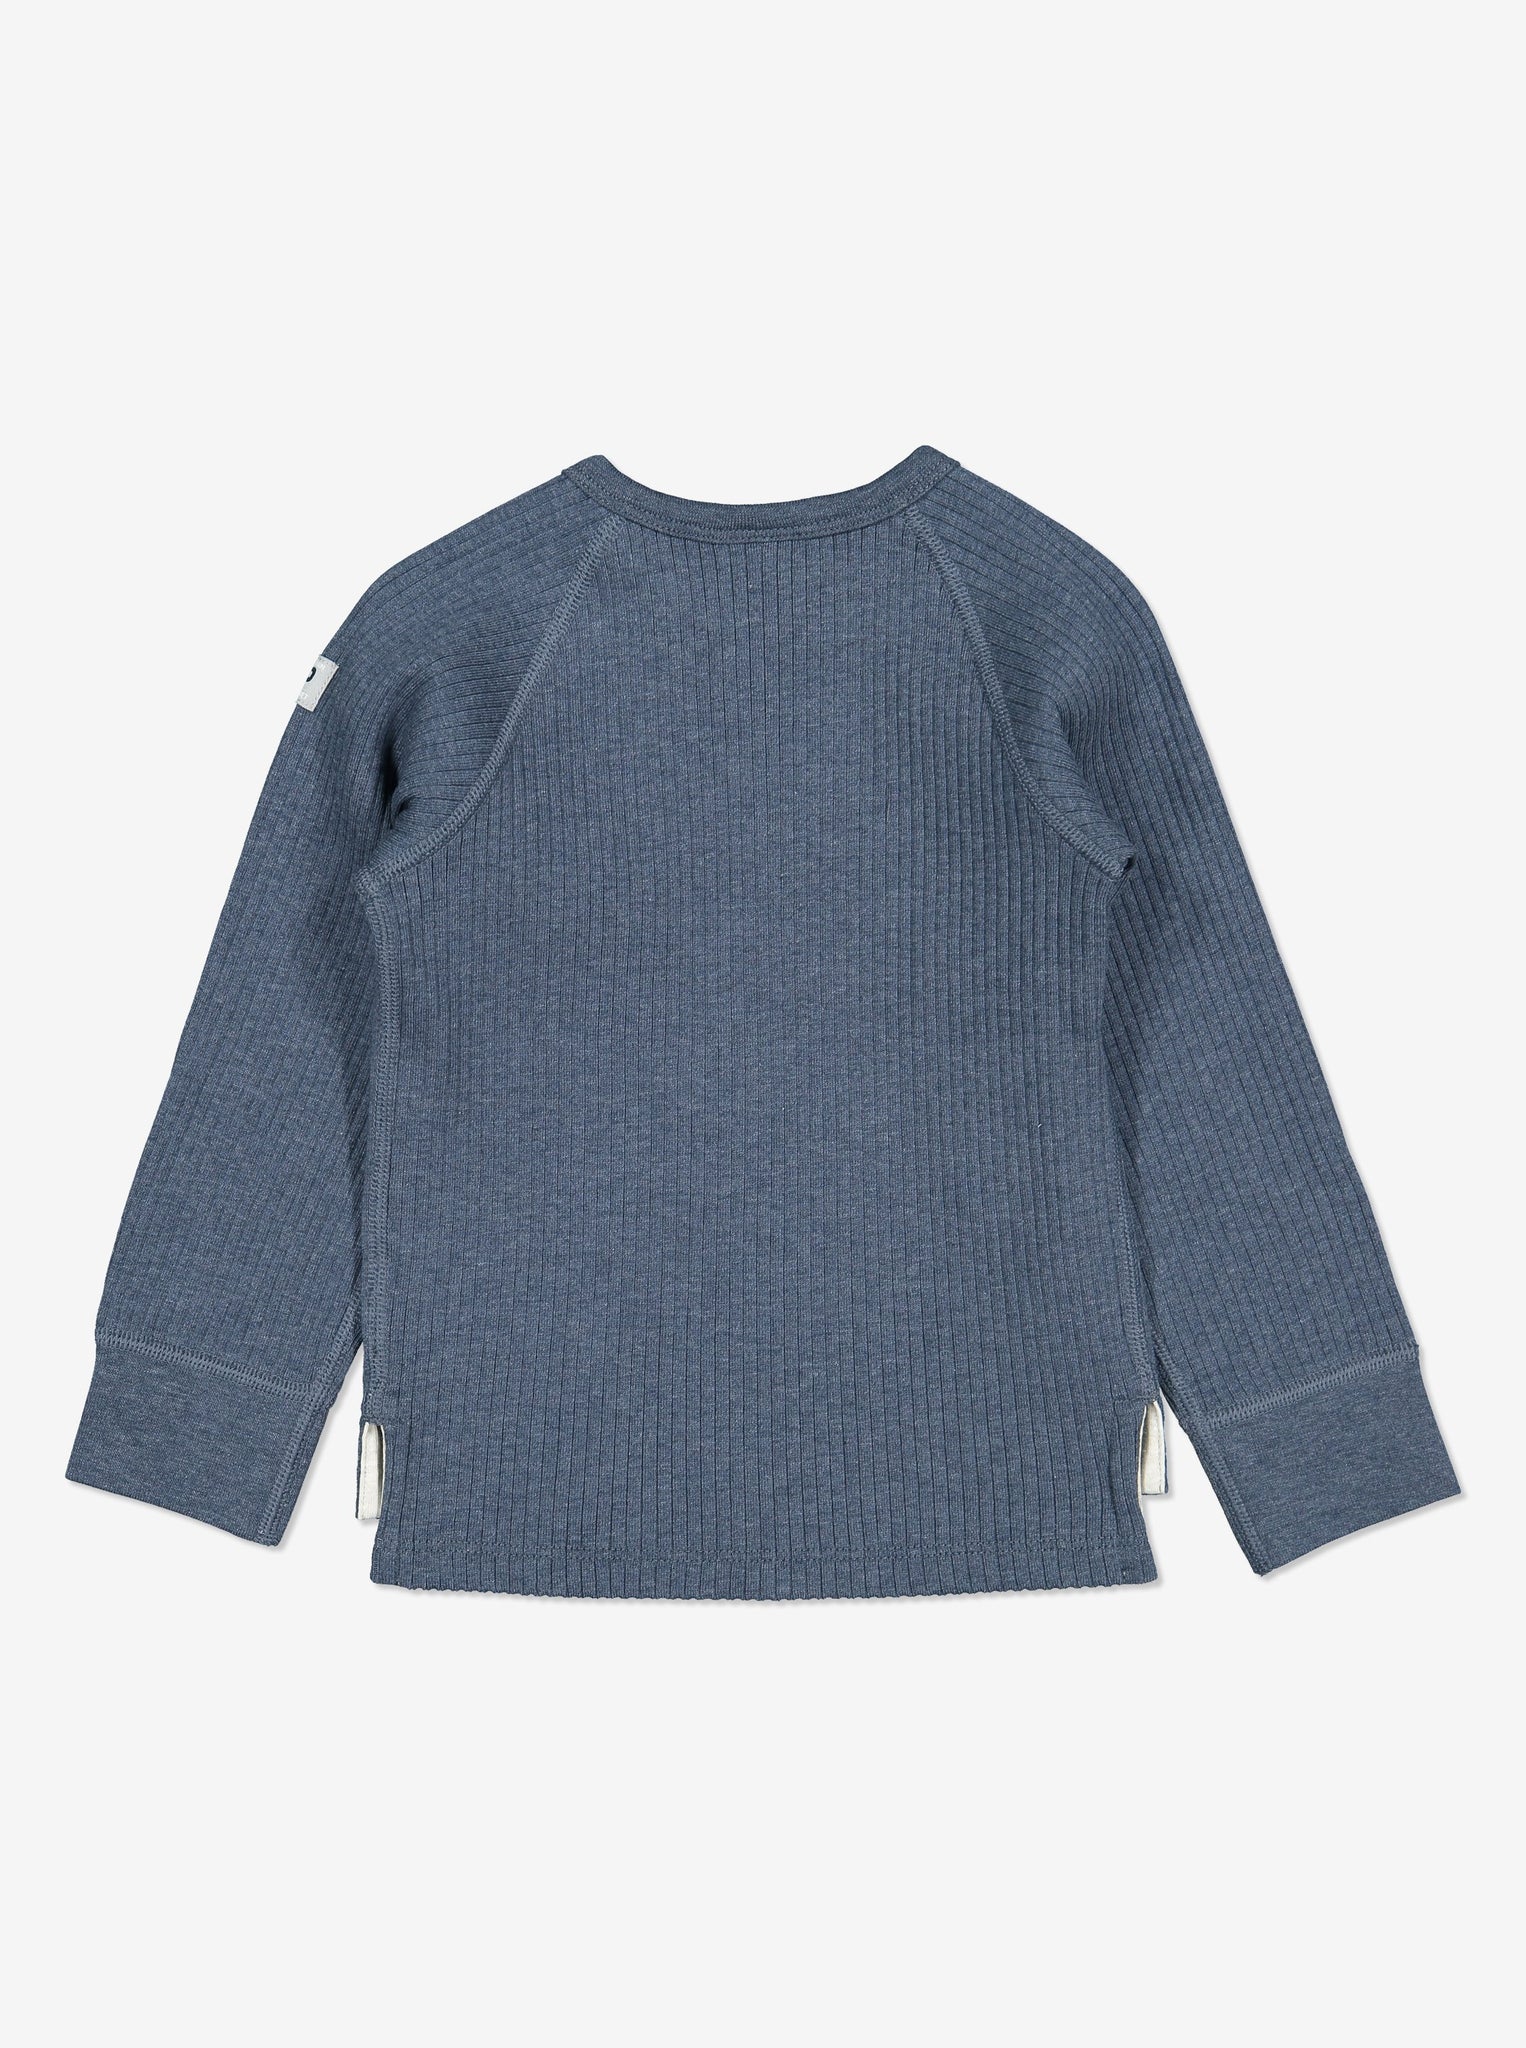 Ribbed Baby Top-Unisex-6m-1y-Blue